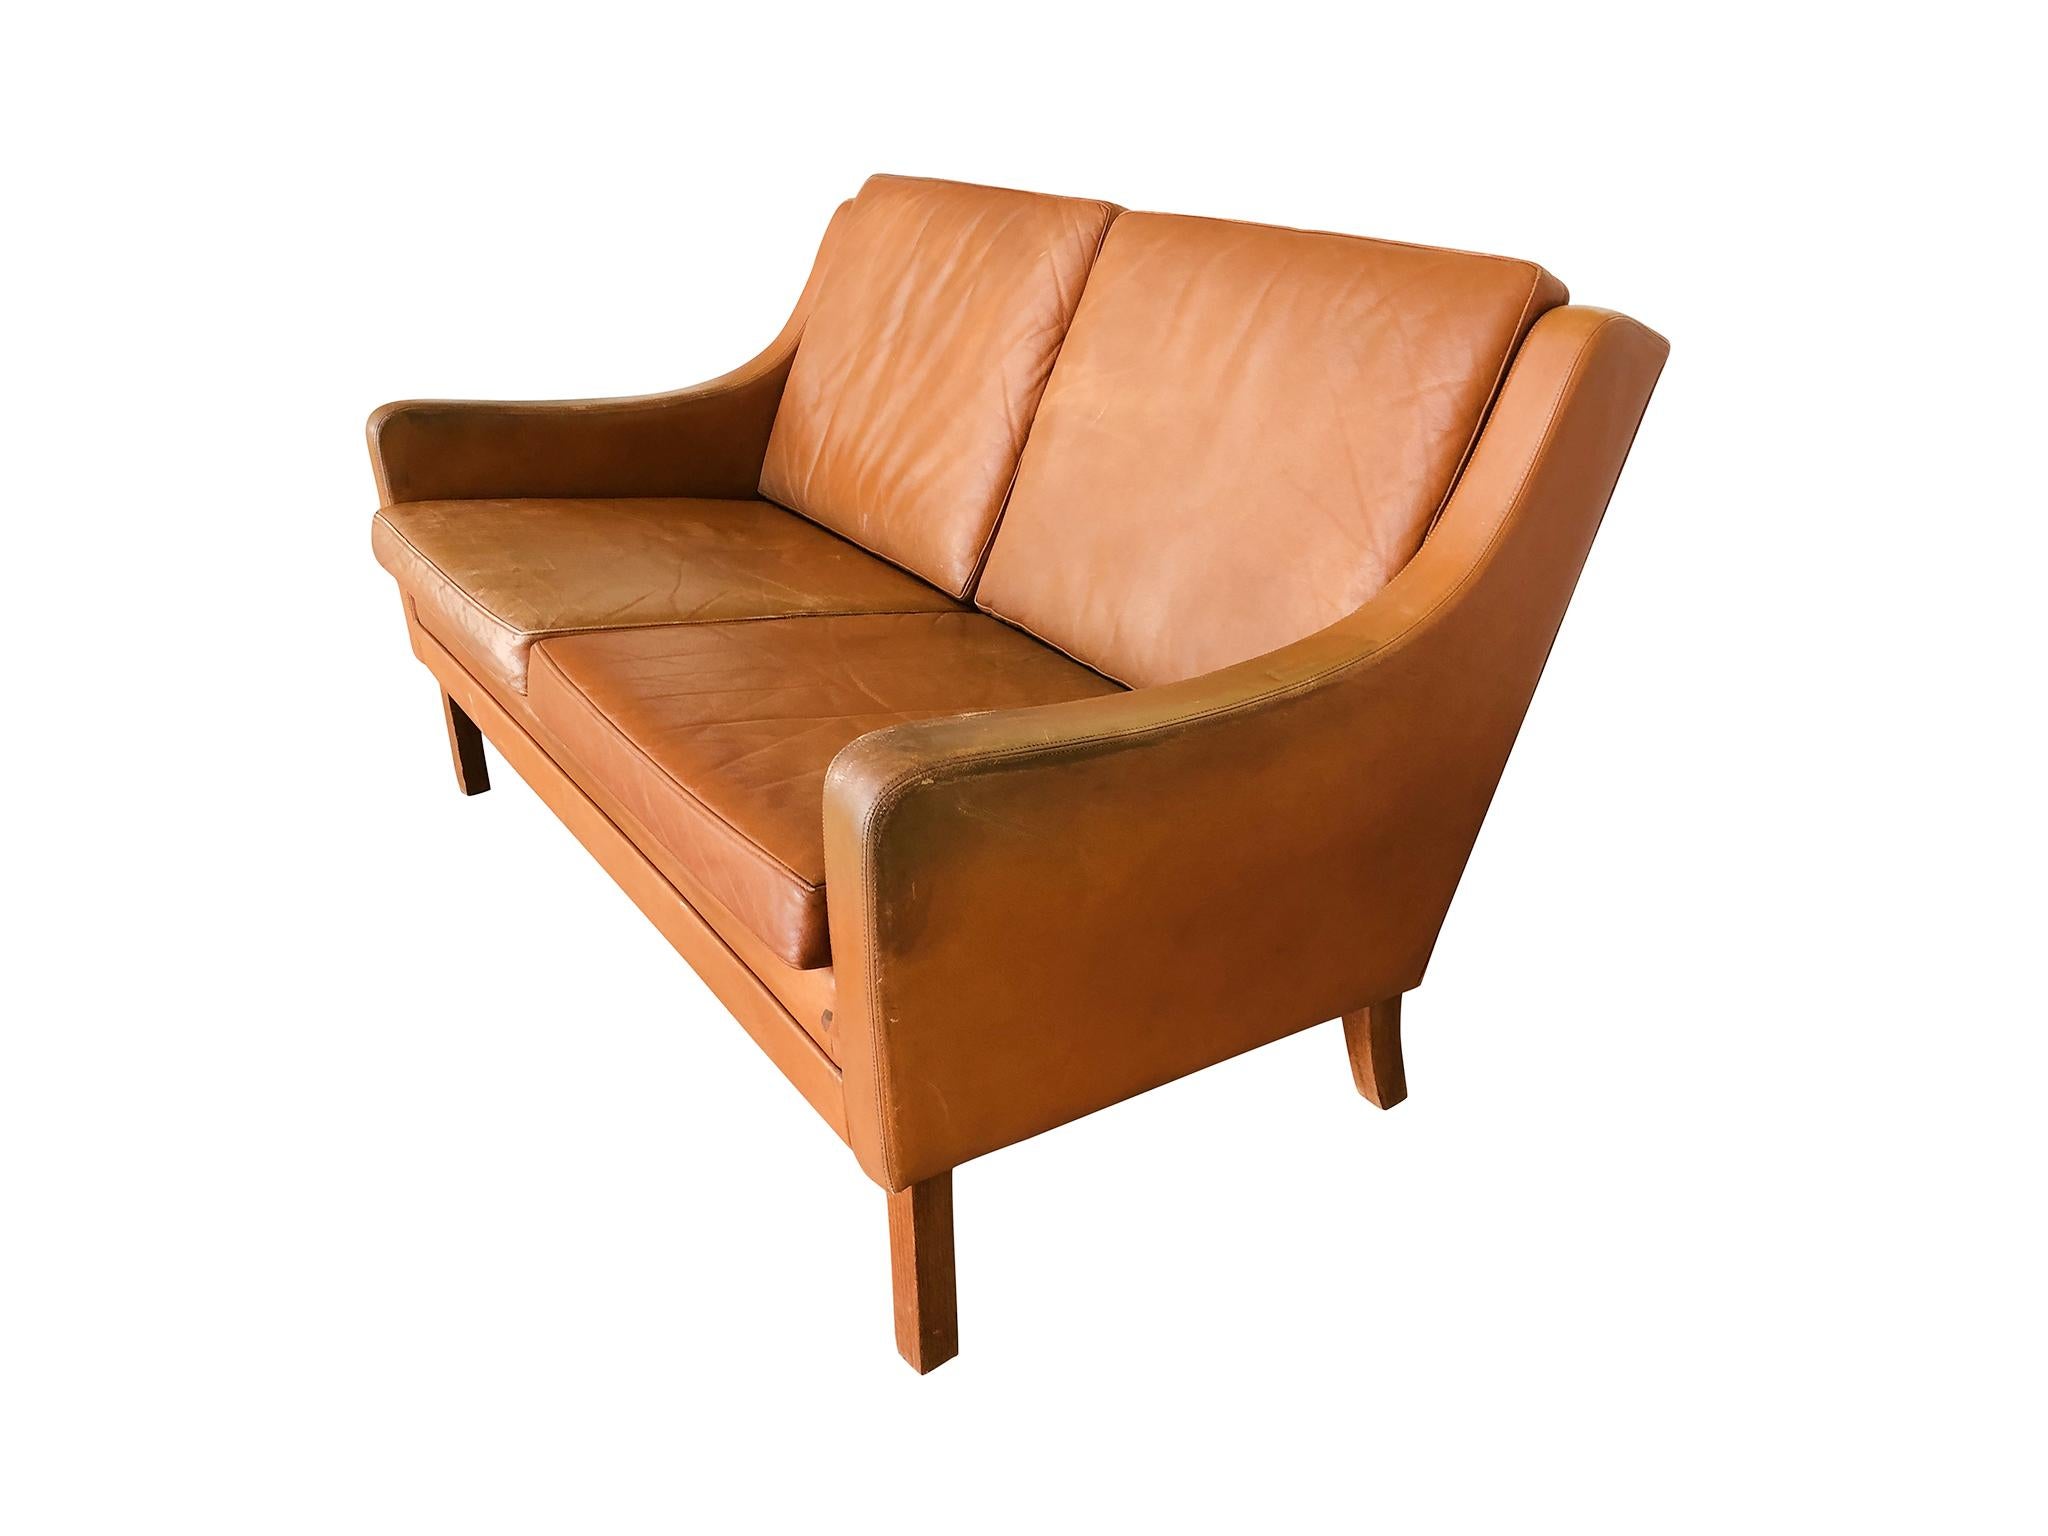 20th Century Danish Modern Leather Settee in the Style of Børge Mogensen